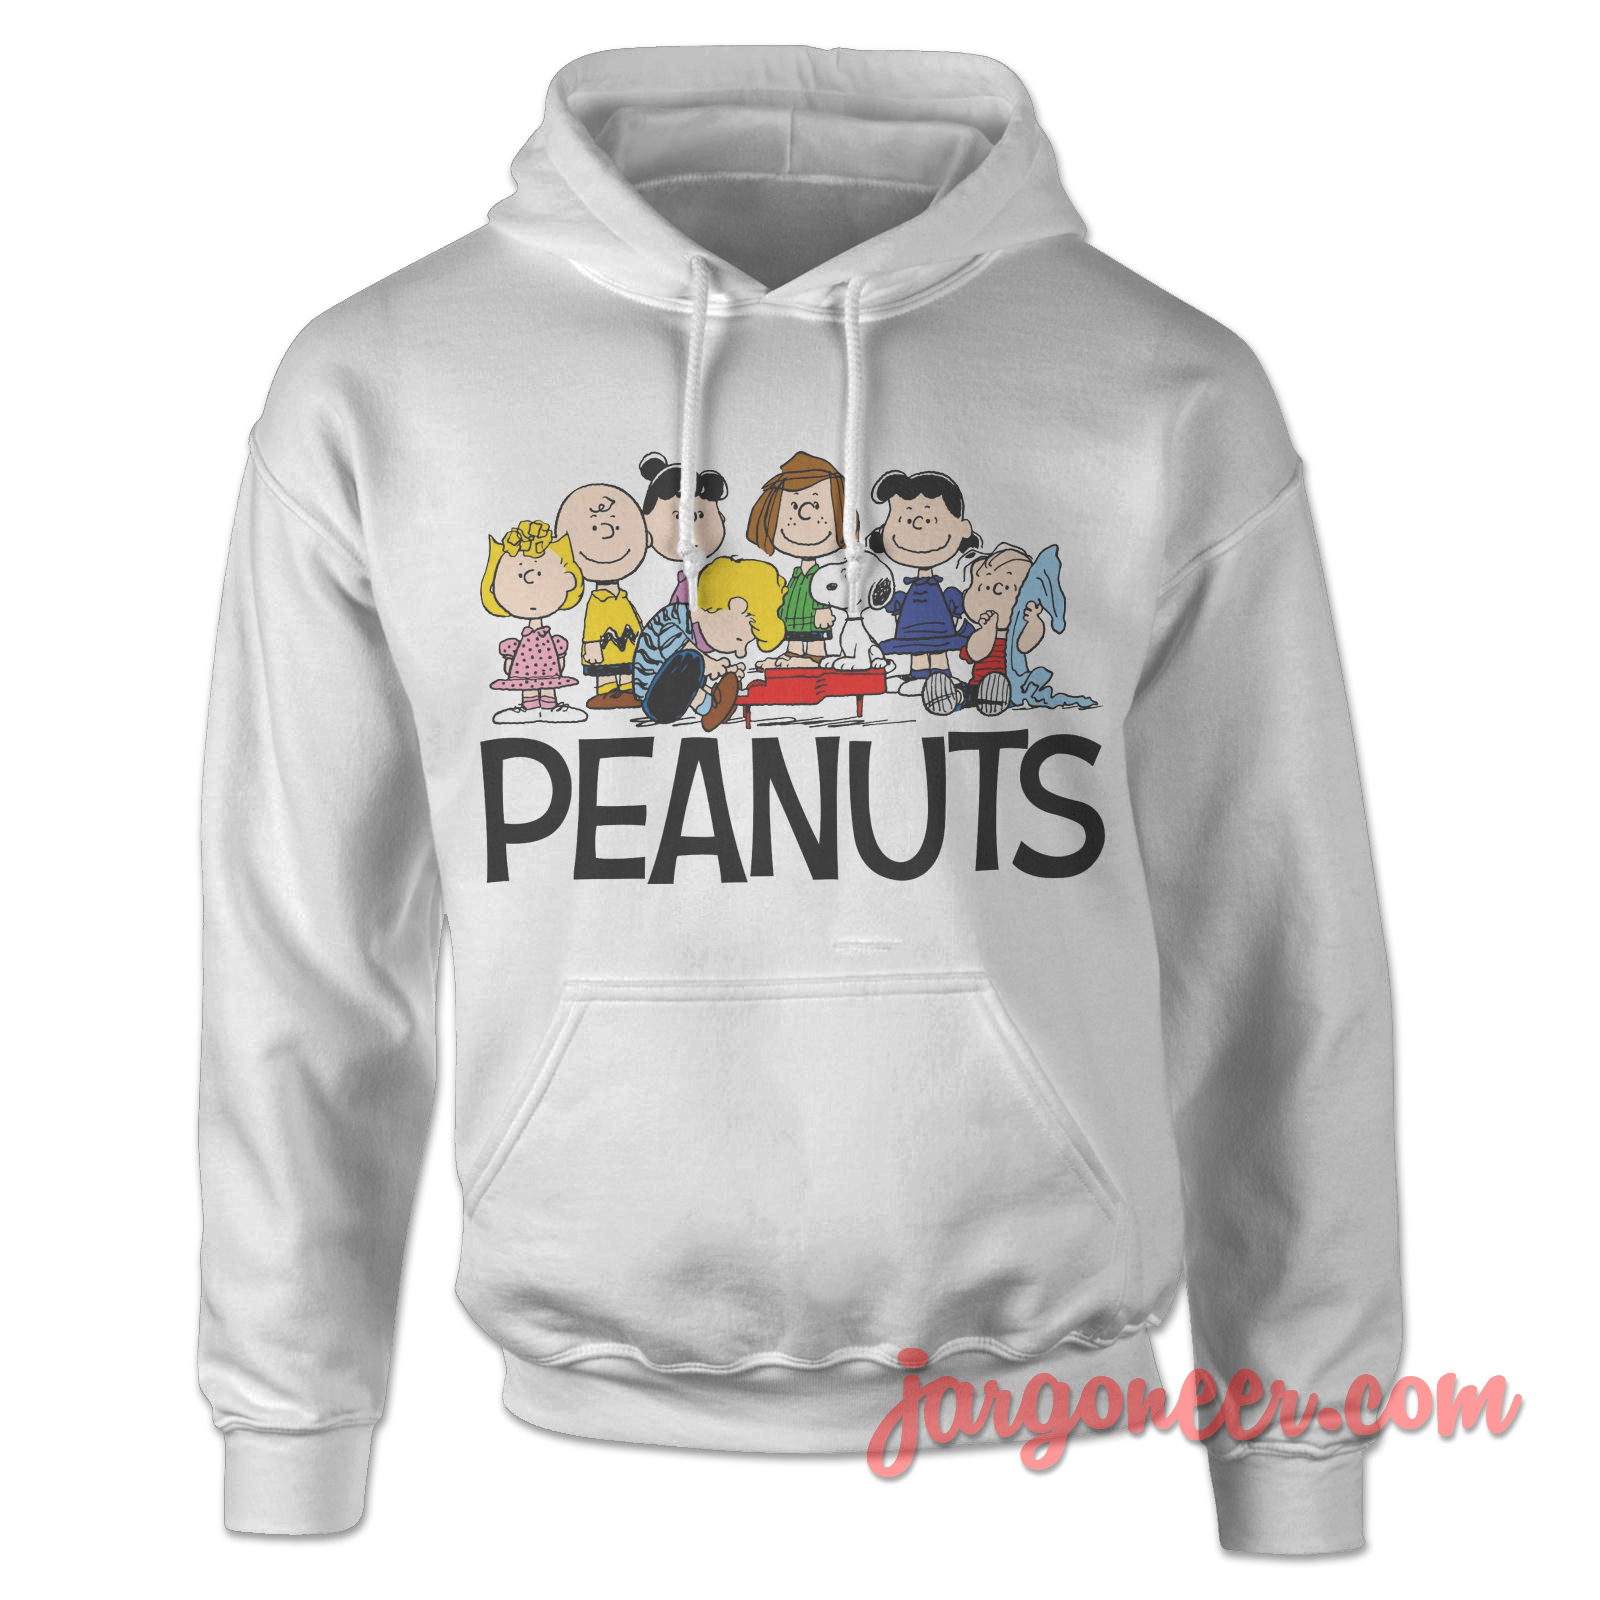 The Peanuts White Hoody - Shop Unique Graphic Cool Shirt Designs